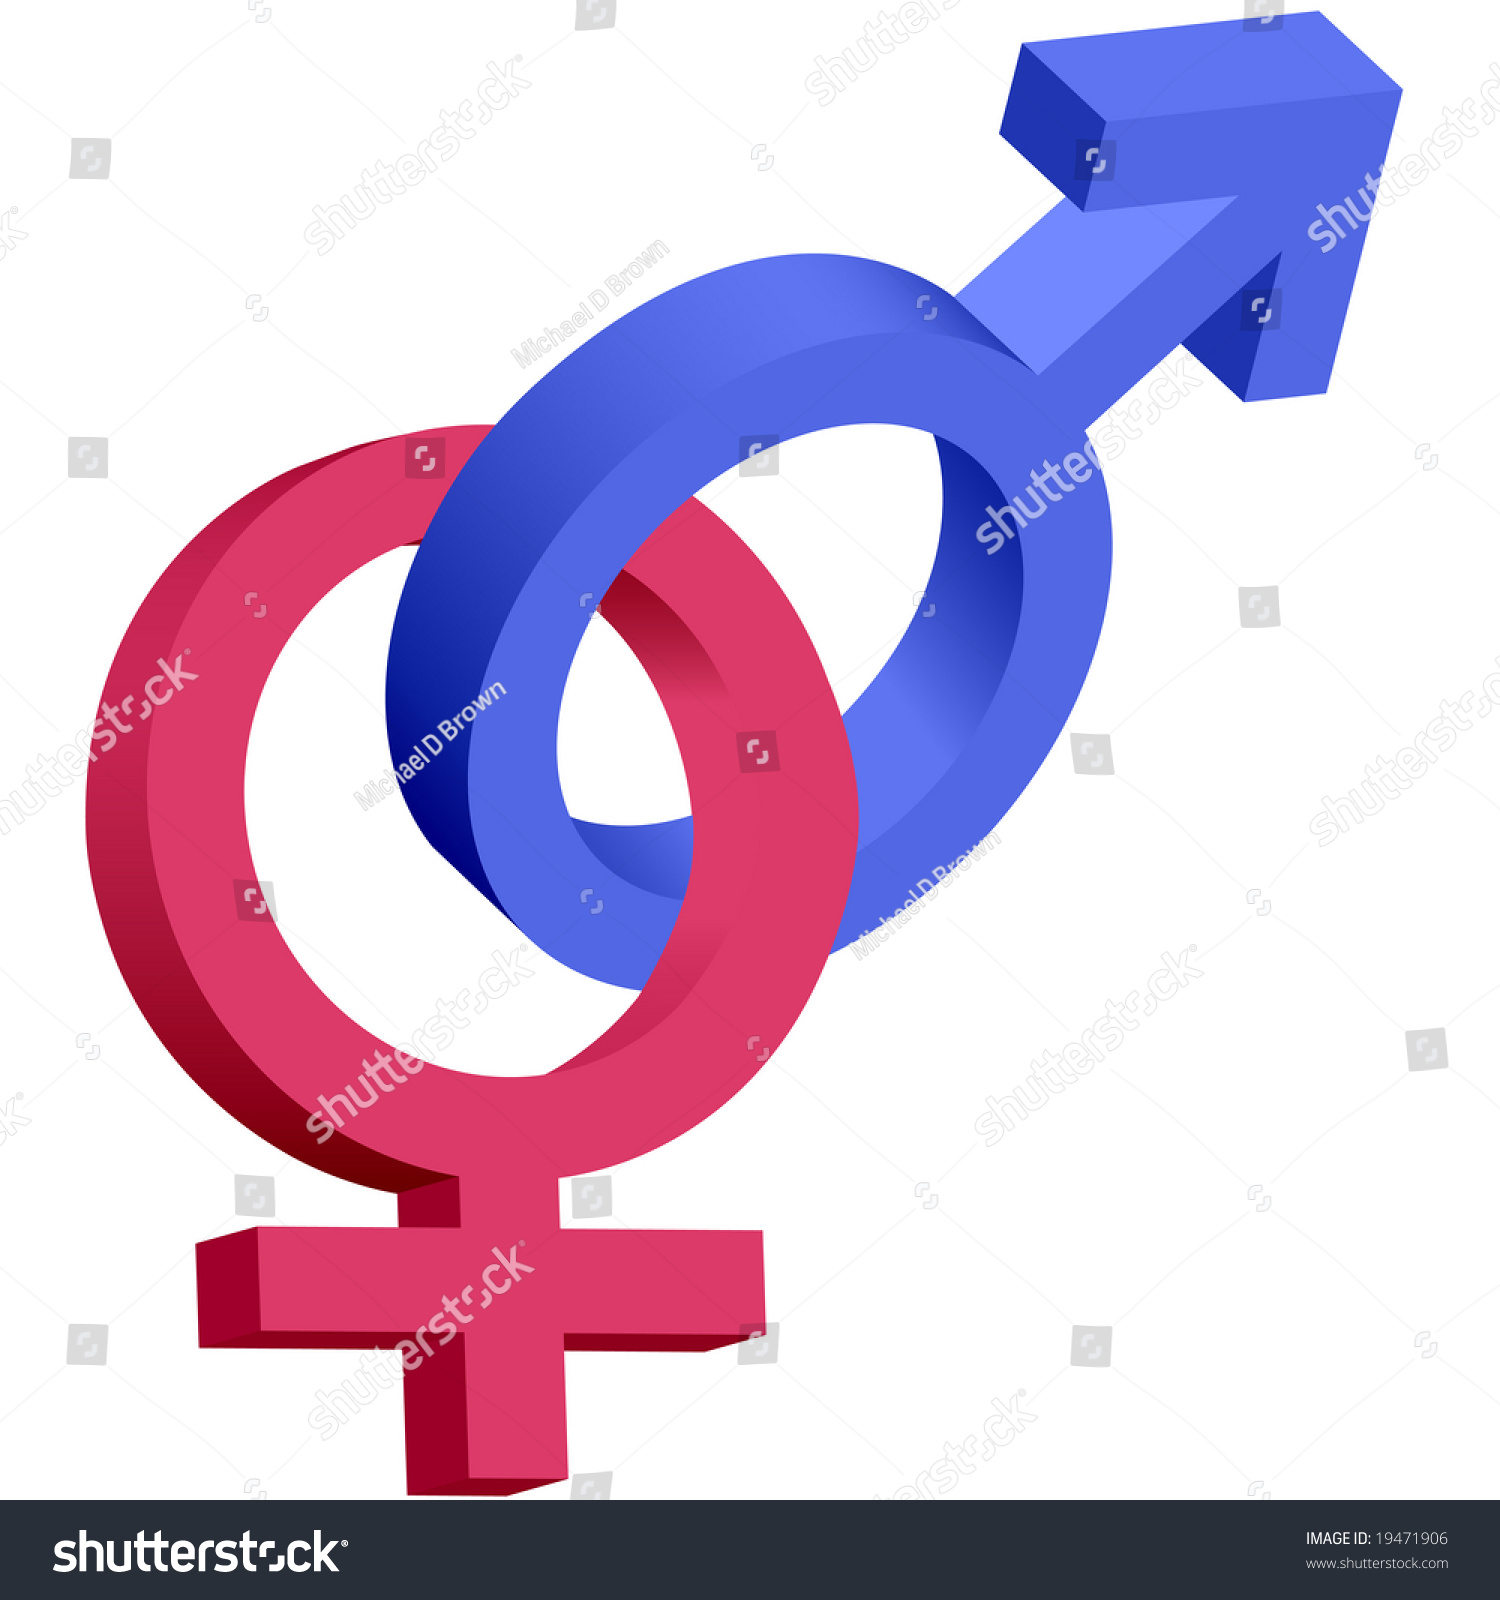 Red And Blue Male Female 3d Gender Symbols Interlocked Isolated On White Stock Vector 0652